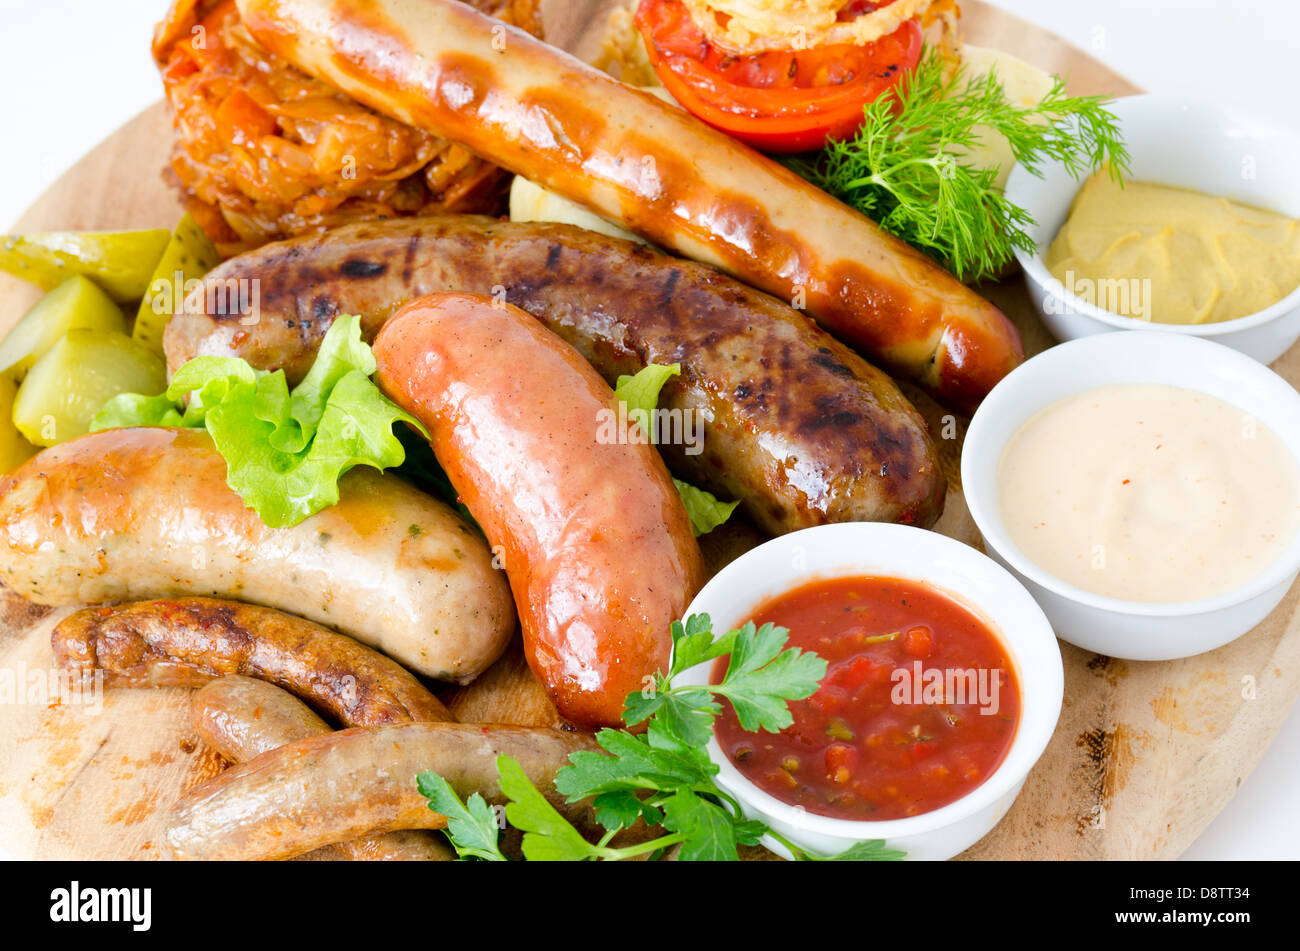 sausages with sauces Stock Photo